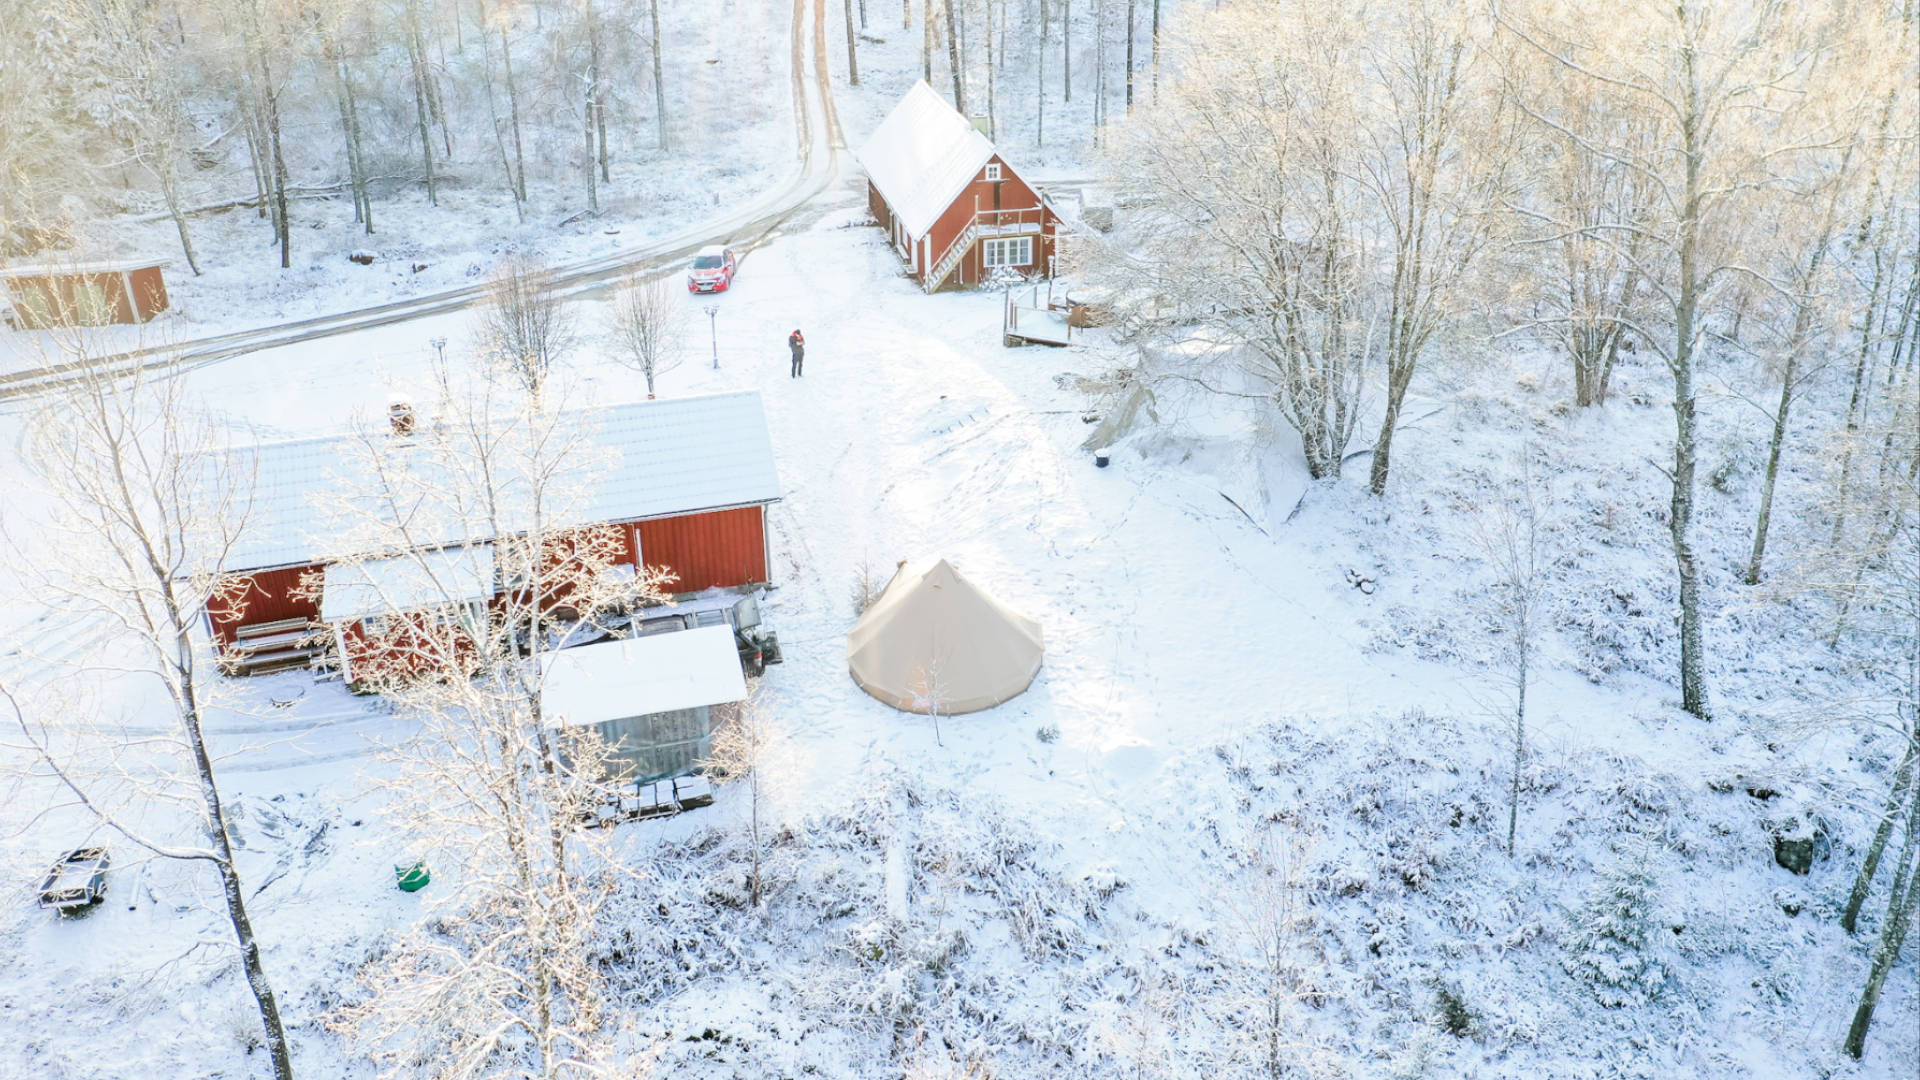 Glamping tent in a forest with snow on the ground